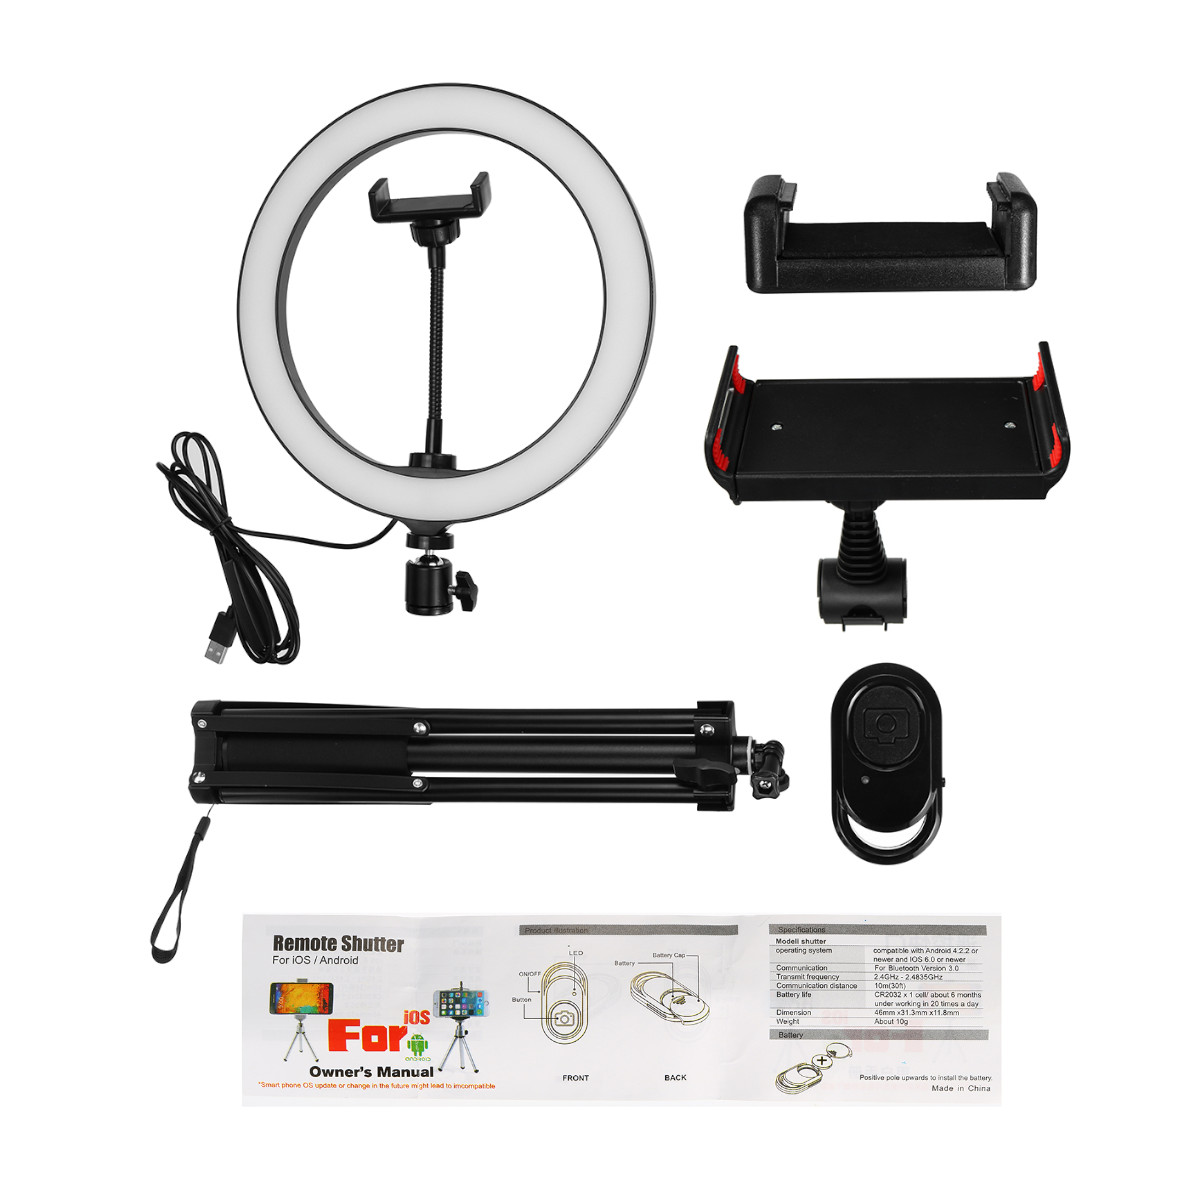 LED-Fill-Ring-Light-Kit-Dimmable-3200K-5500K-with-Phone-Holder-Tripod-Remote-Control-for-Photography-1785757-7